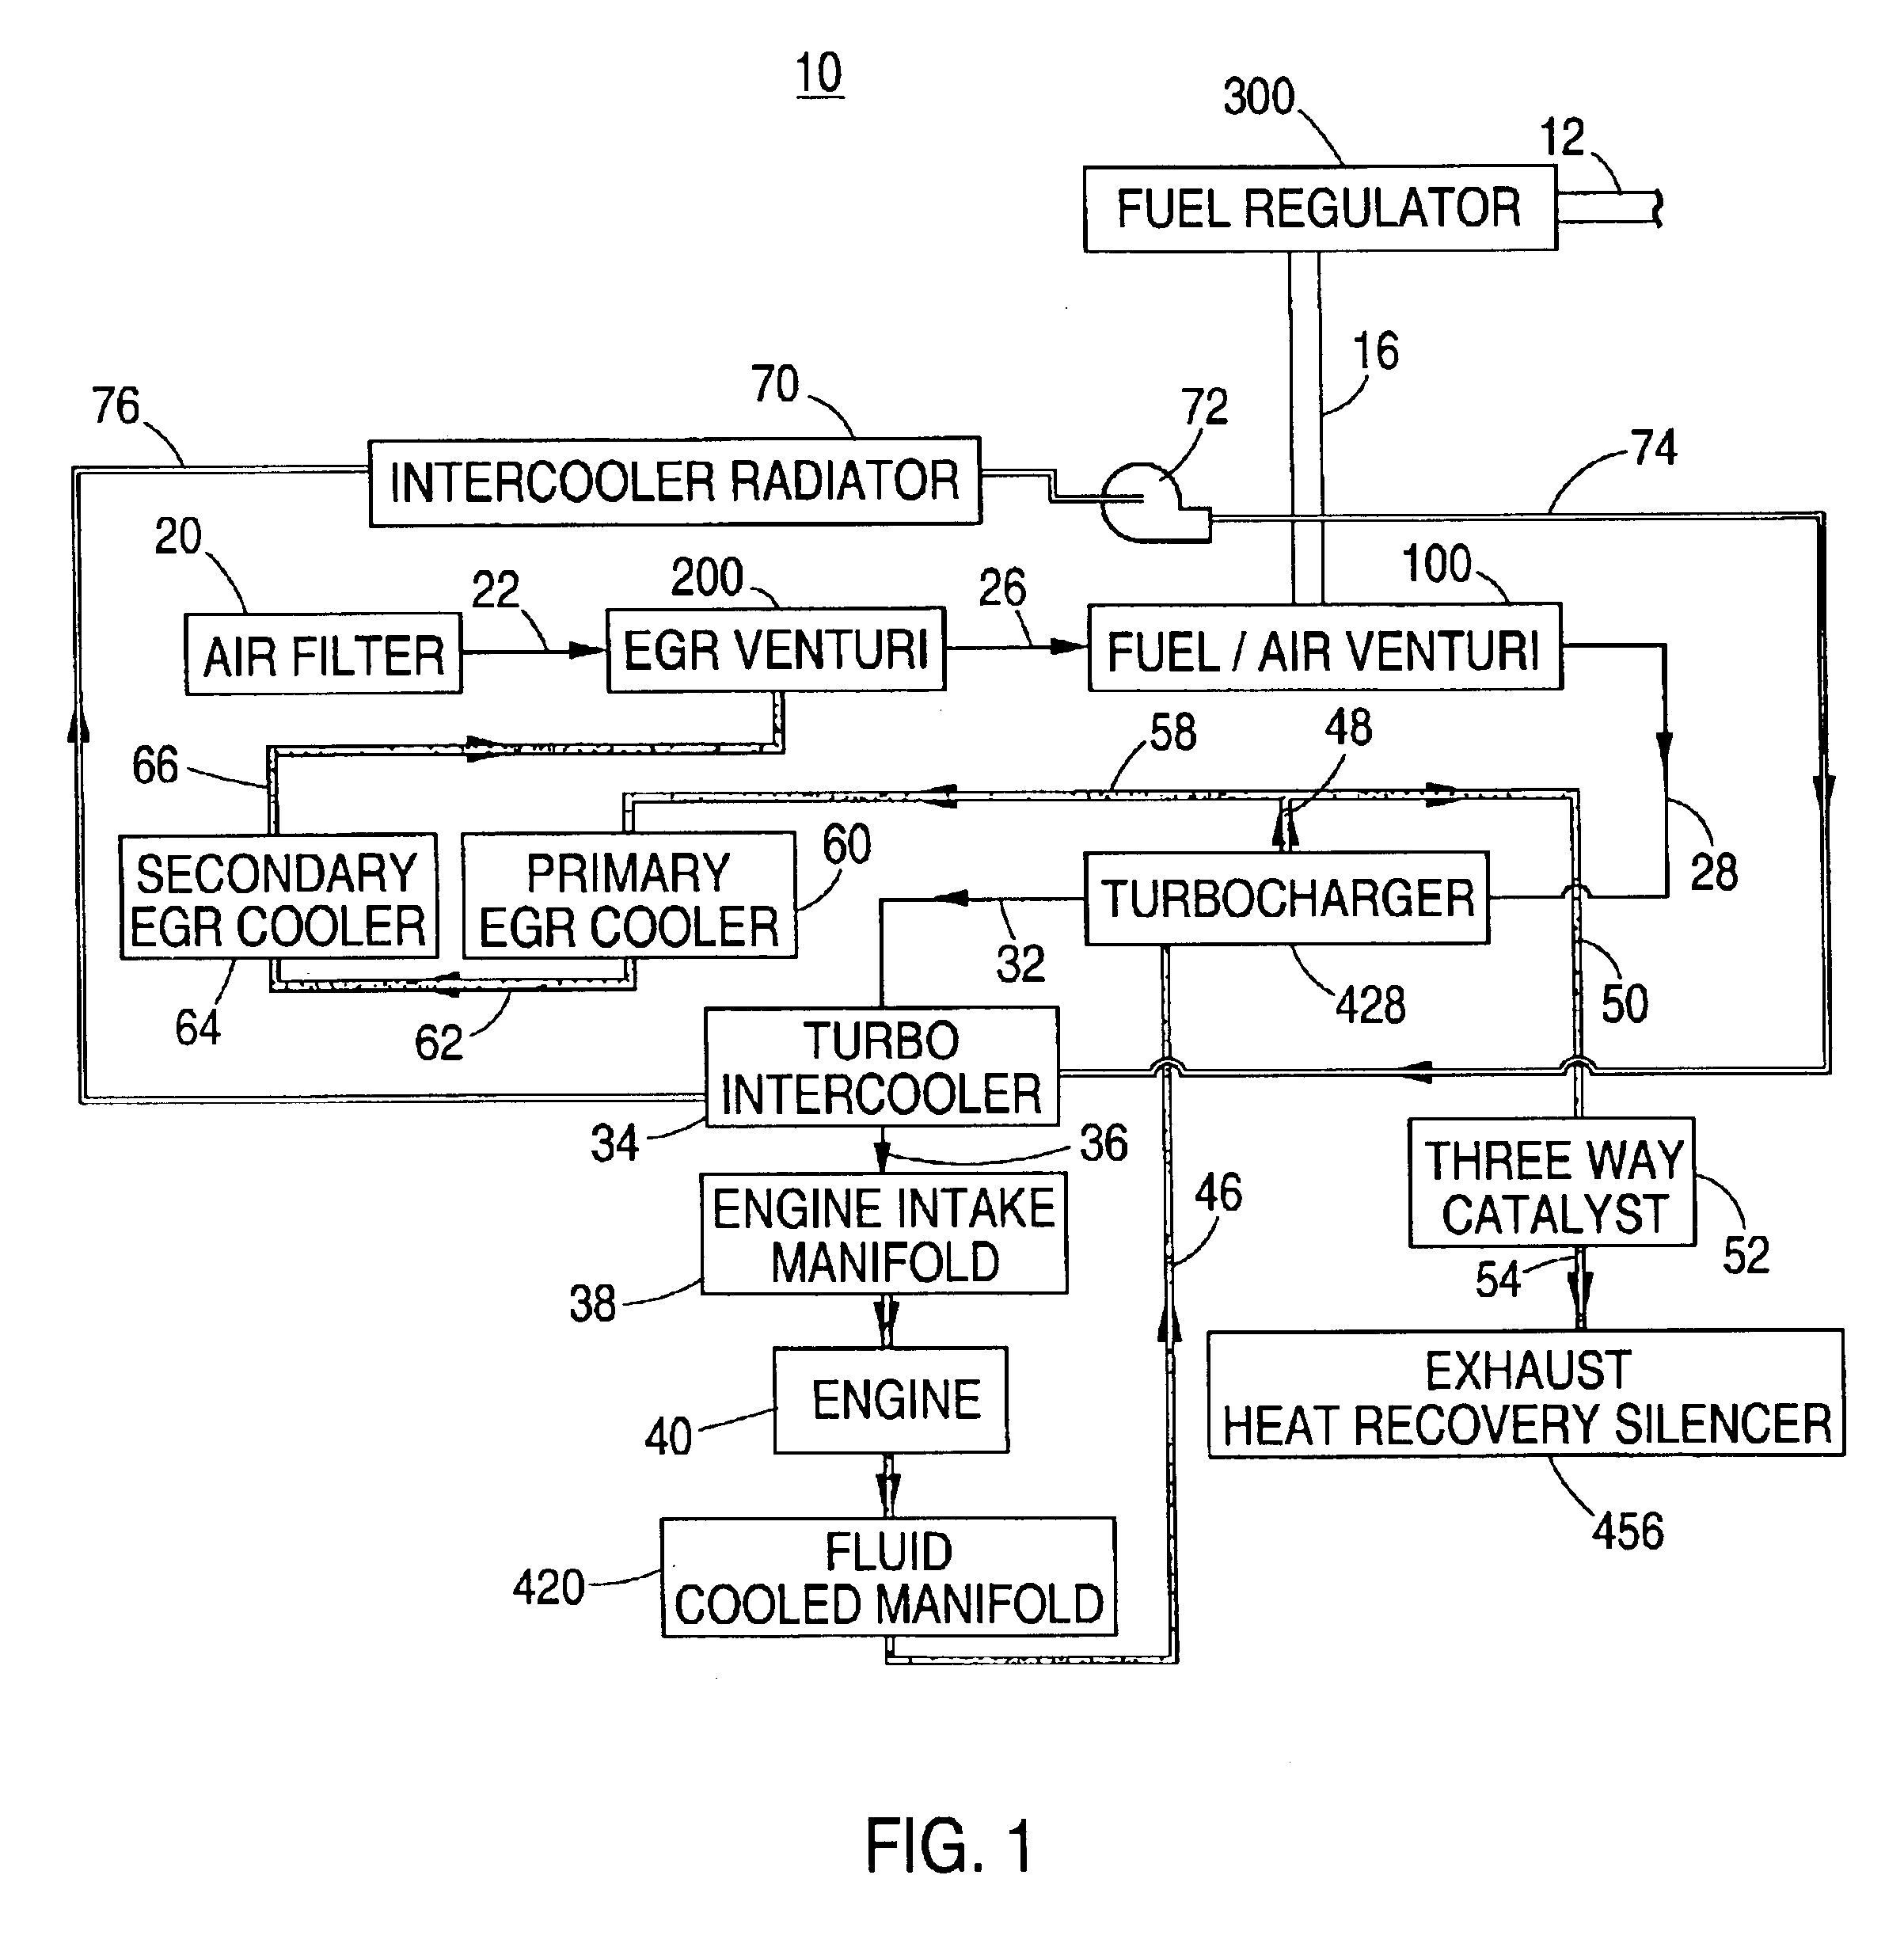 Carburetion for natural gas fueled internal combustion engine using recycled exhaust gas